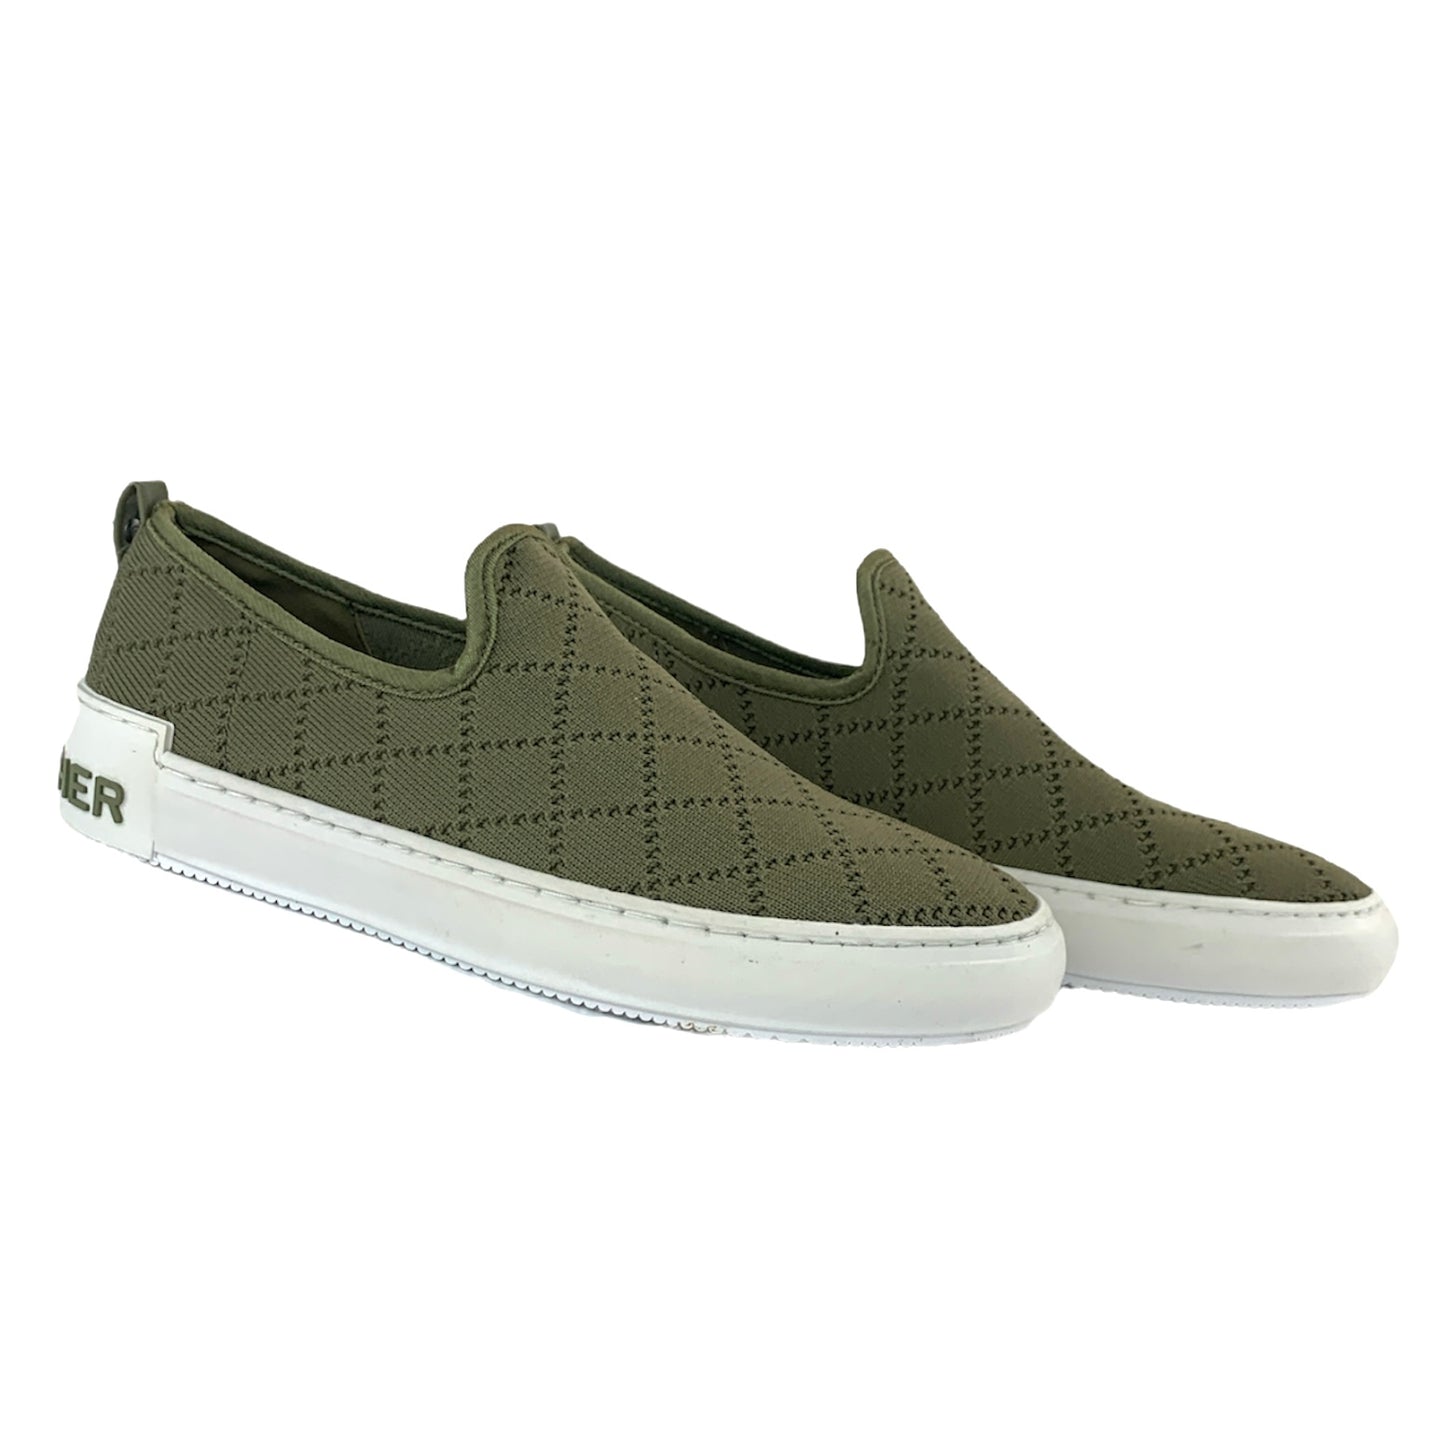 Slip On Low Top Knit Comfort Shoes Women's Fashion Sneakers